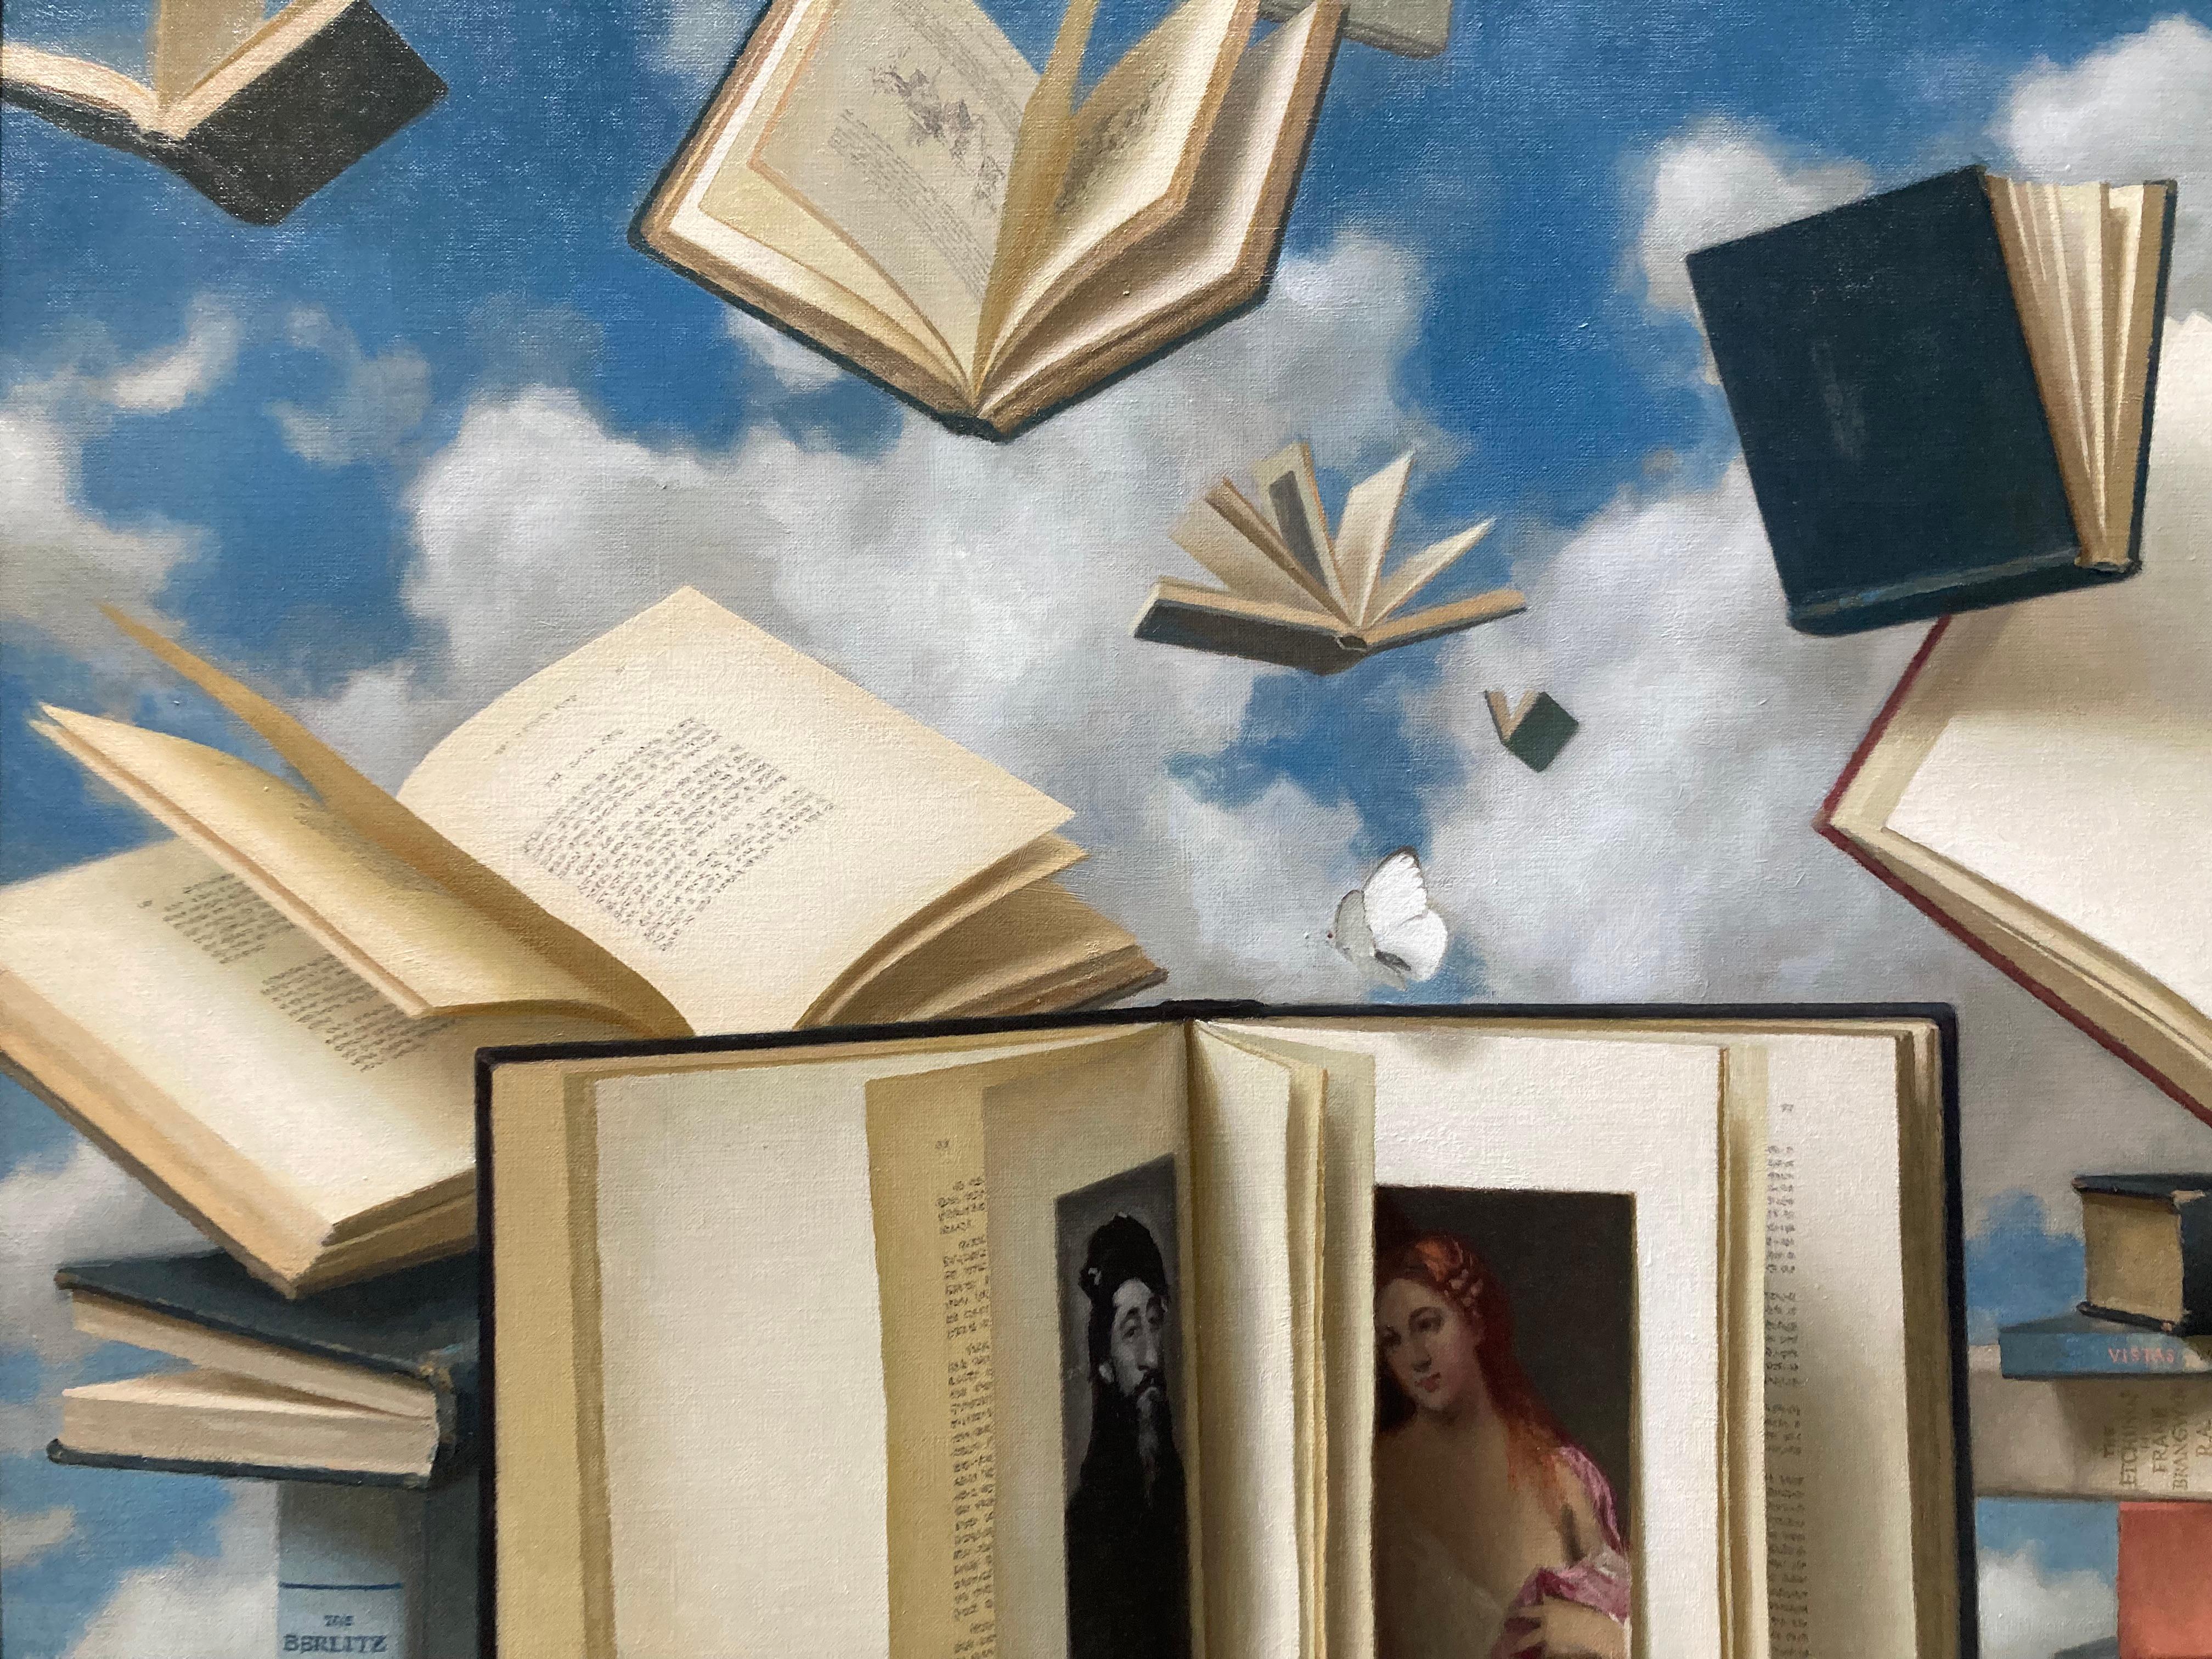 Floating Books and Butterflies - 2023 Surrealist still life and skyscape 8